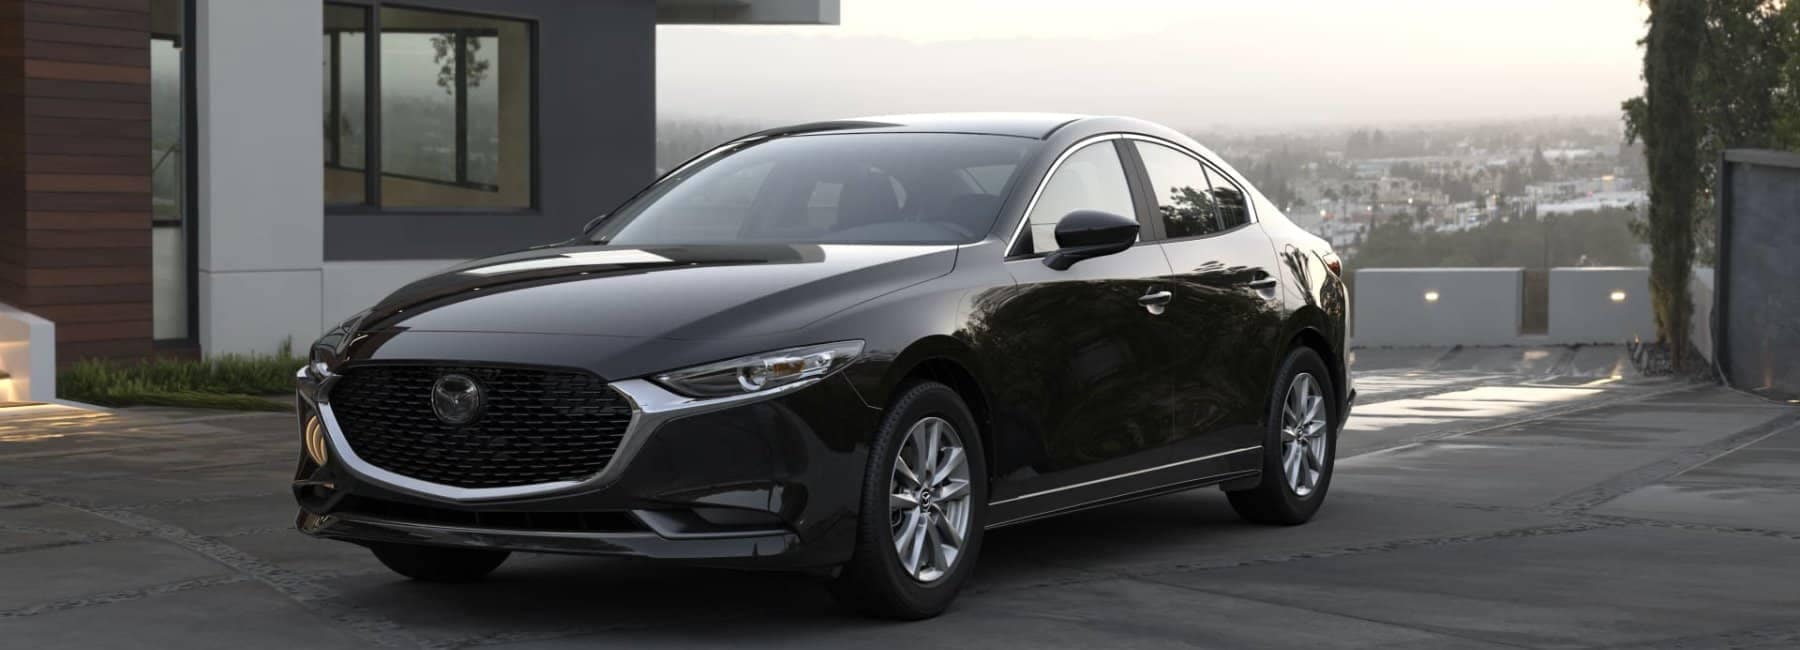 2022-mazda3-sedan-front-3qview-parked-house-driveway-cityview-black